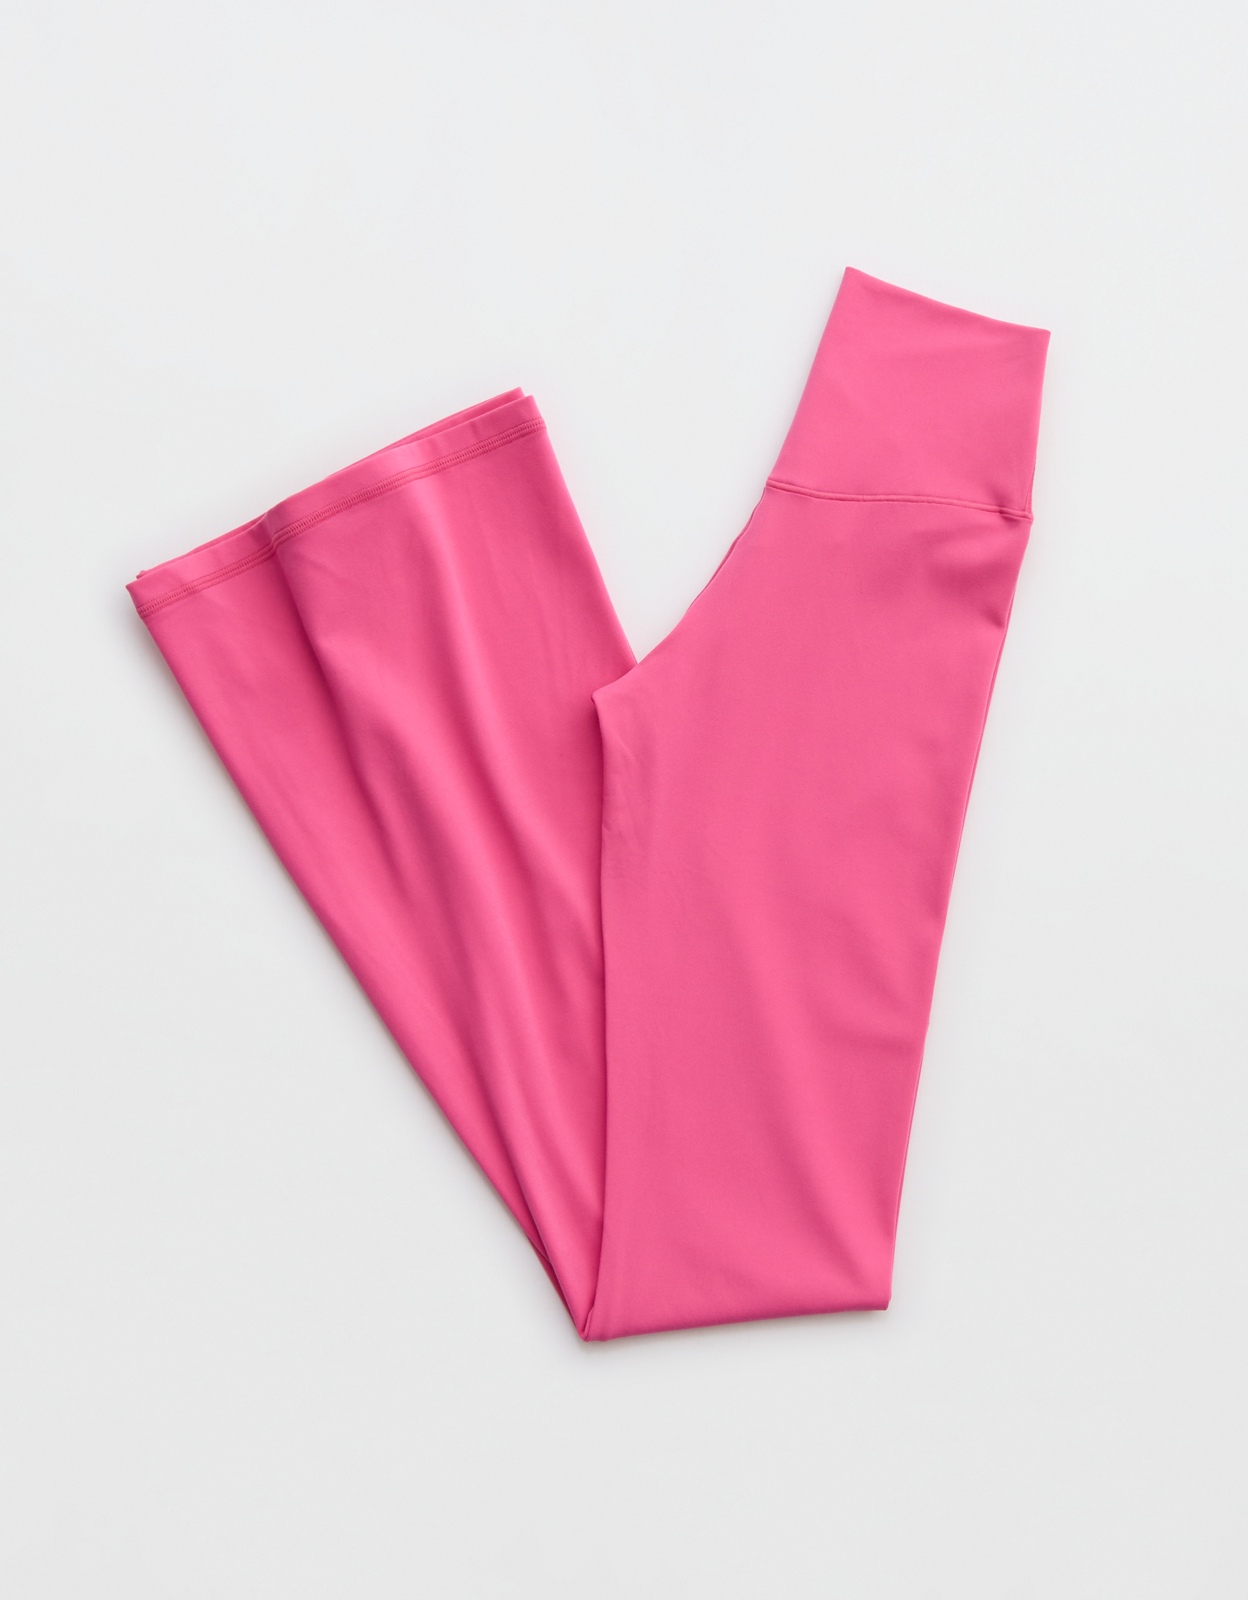 Aerie Leggings Pink Size XS - $18 (77% Off Retail) - From Gabby